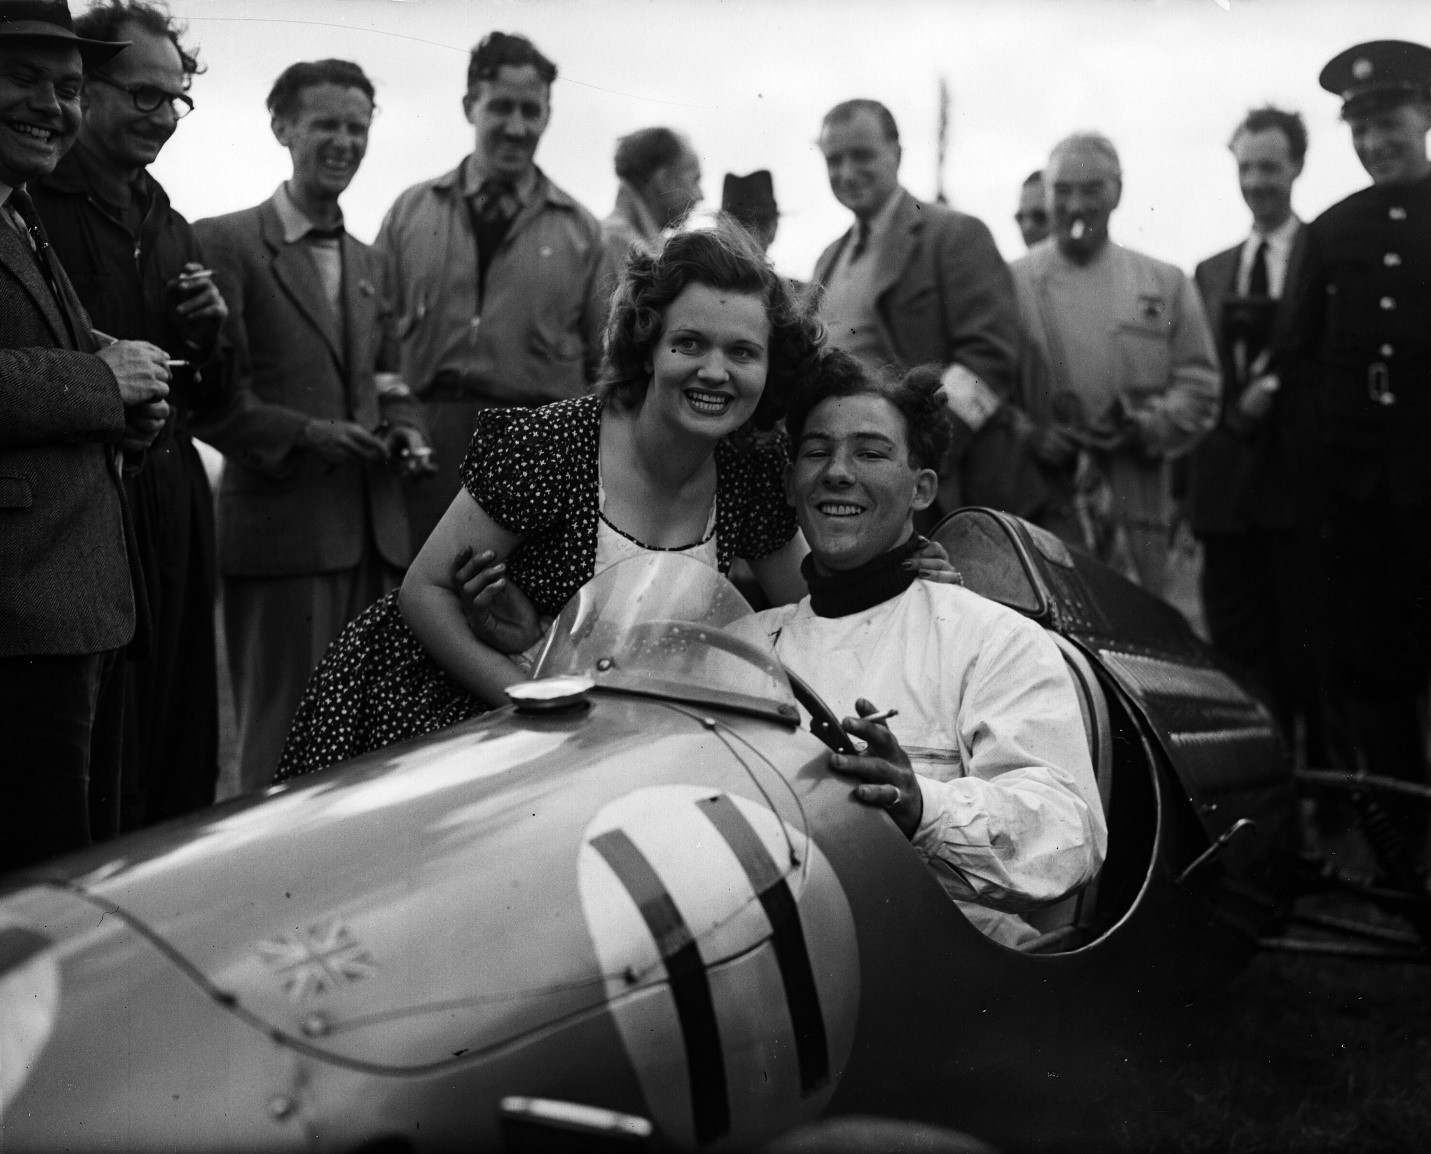 Stirling Moss being congratulated by Mrs. John.